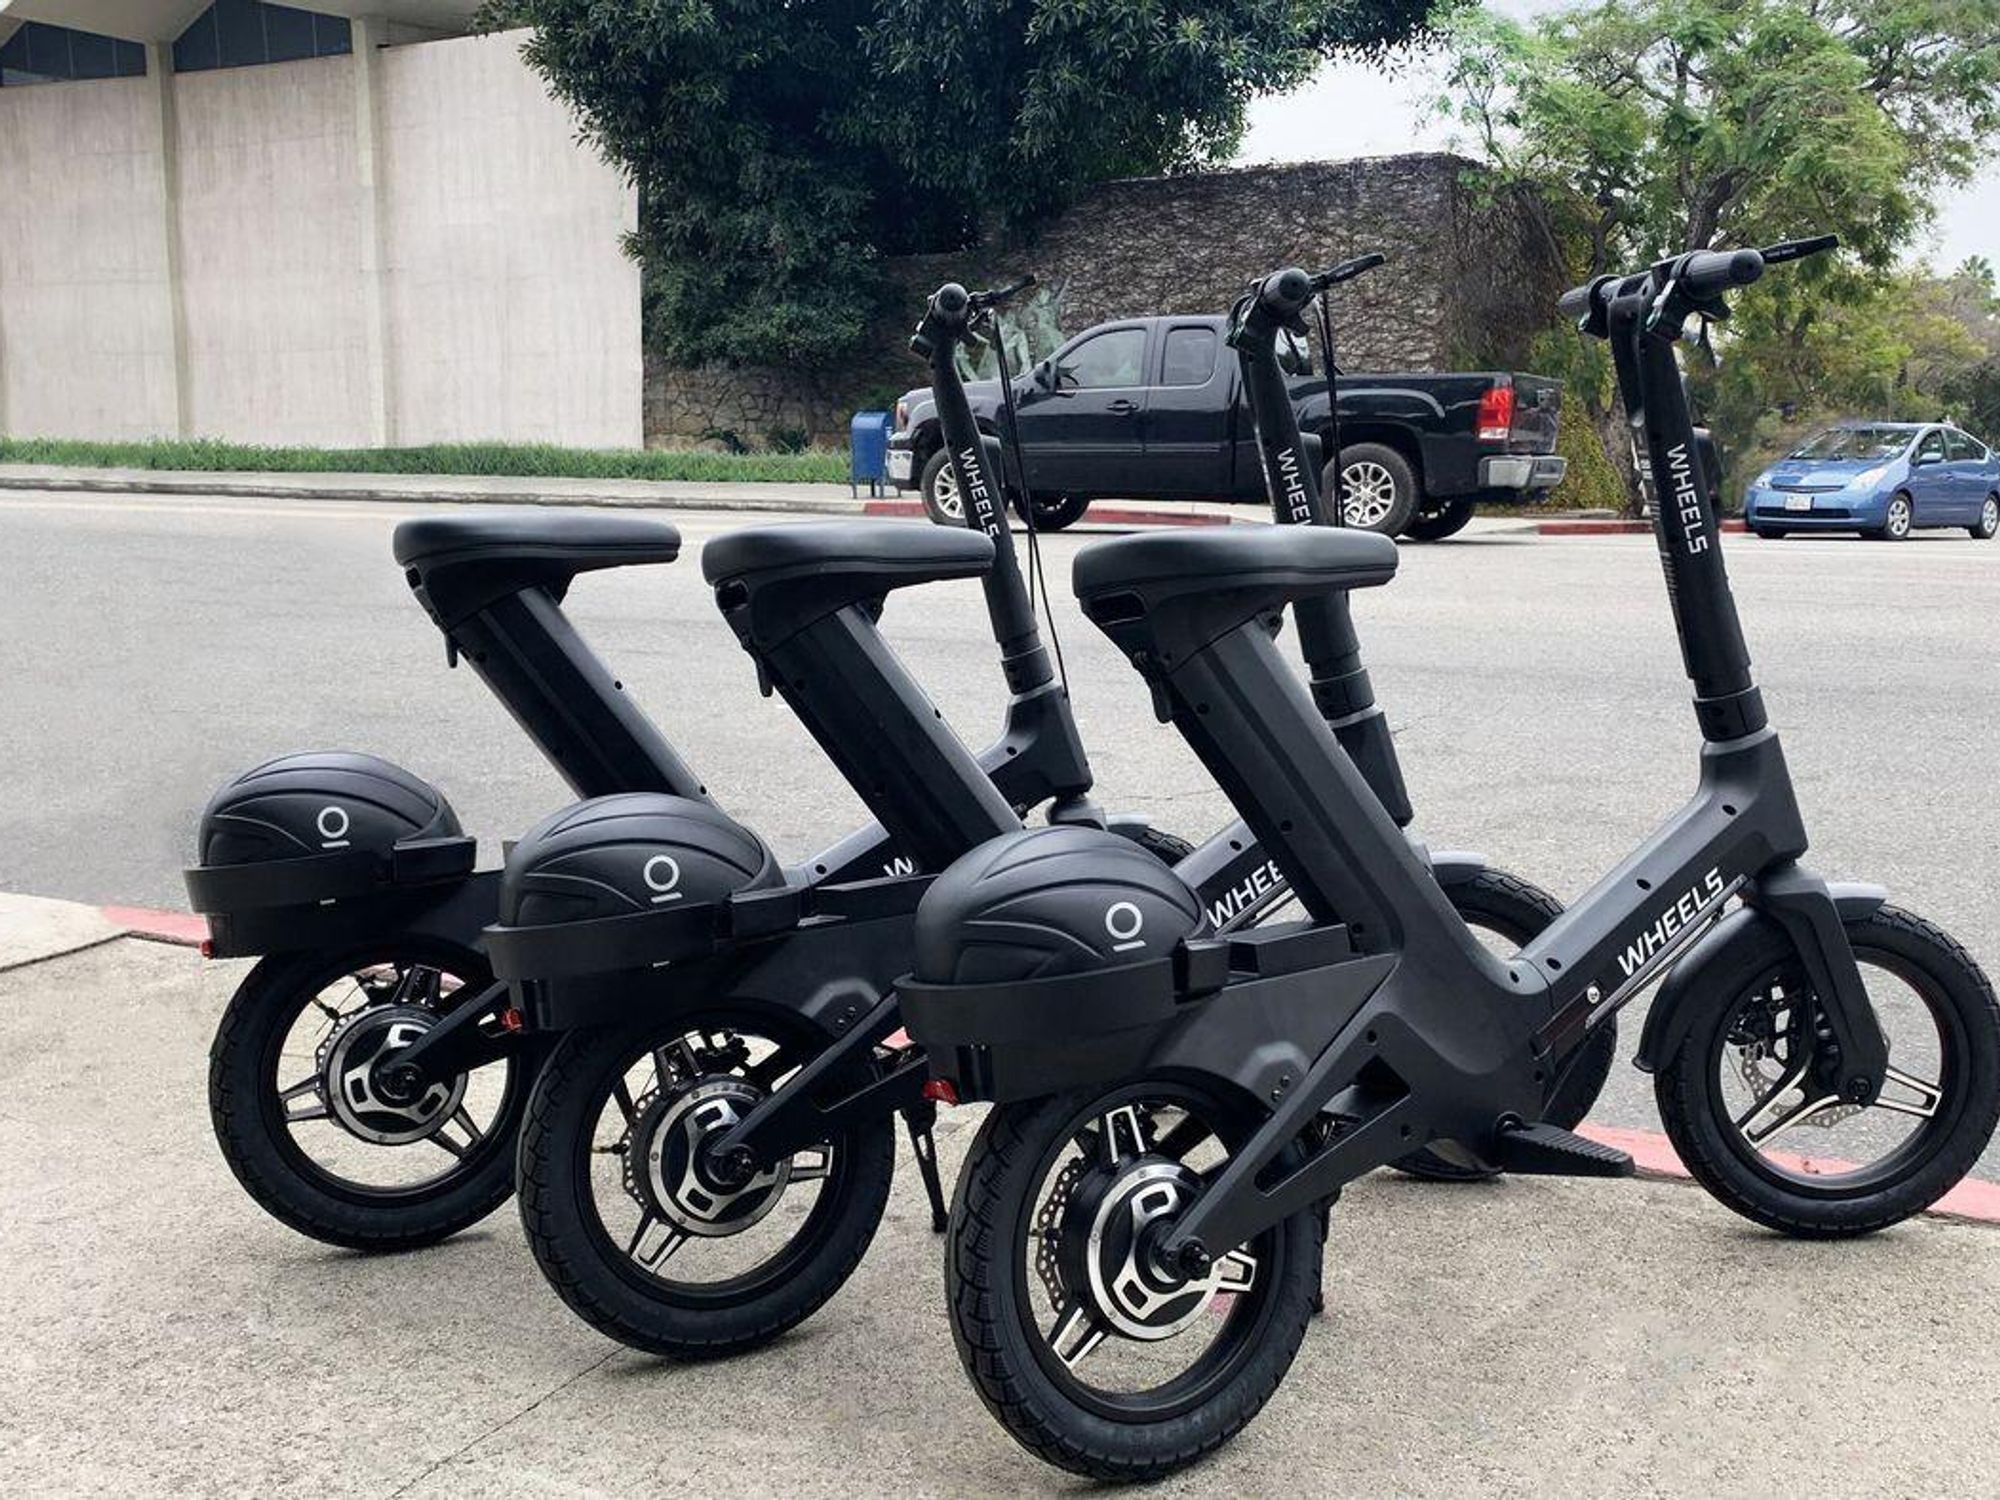 E-Bike Startup Wheels Agrees To Sell Business to Micromobility Firm Helbiz